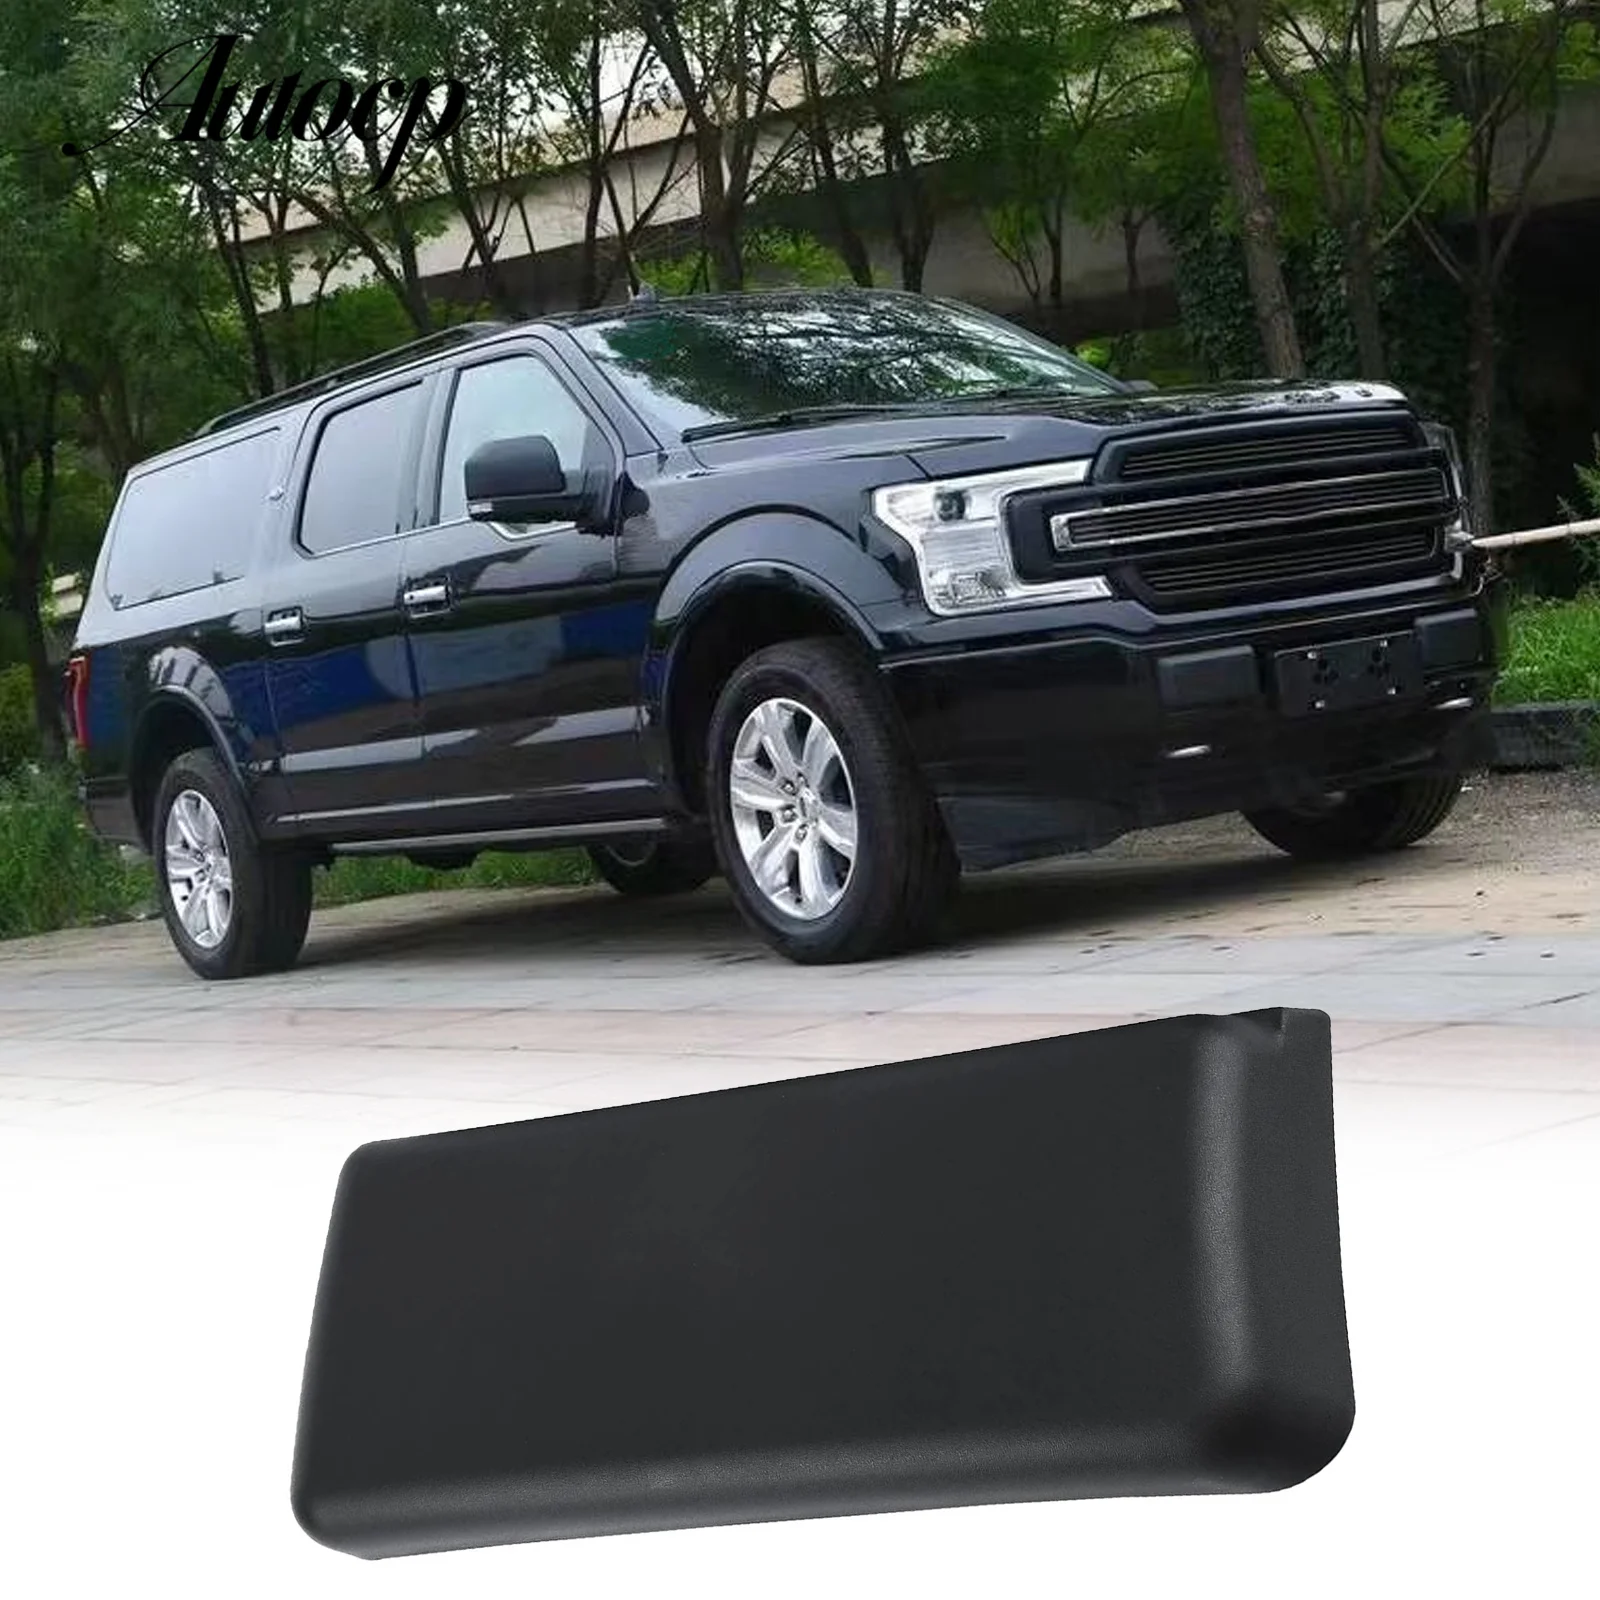 

Front Bumper Guards Pads & License Plate Frame Bracket For 2009-2014 Ford F150